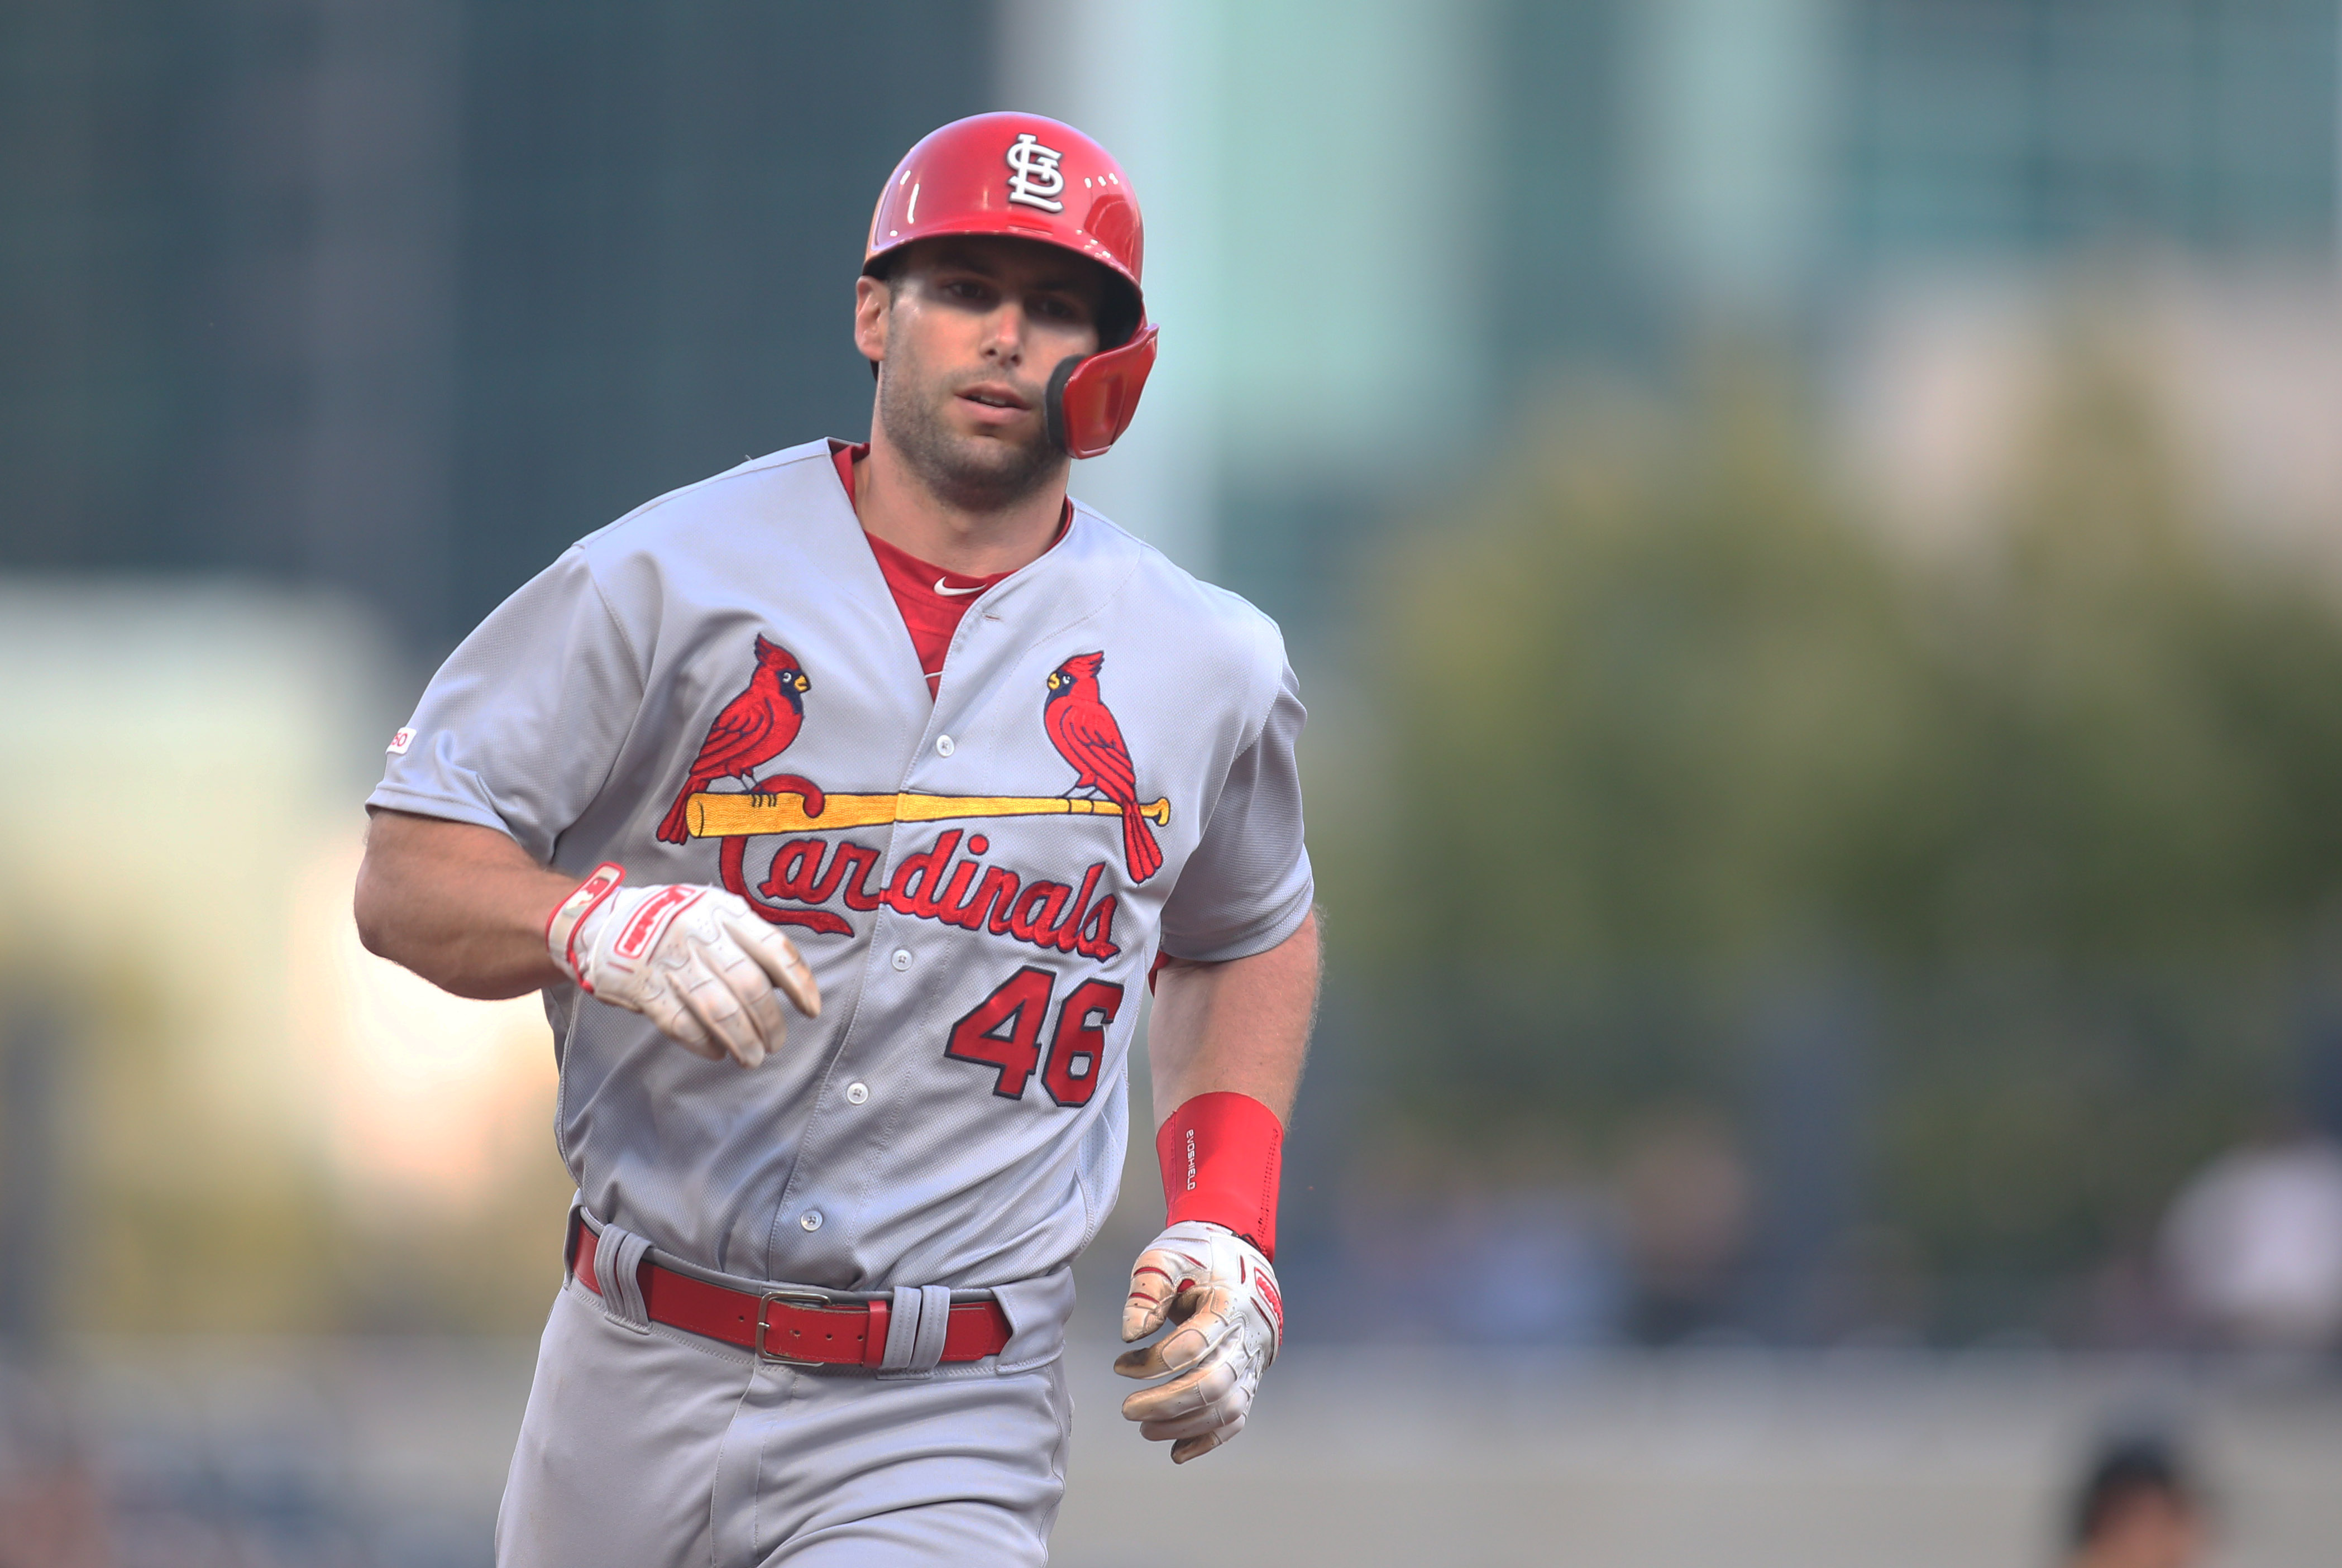 Paul Goldschmidt hits home run in fifth straight game as Cardinals now